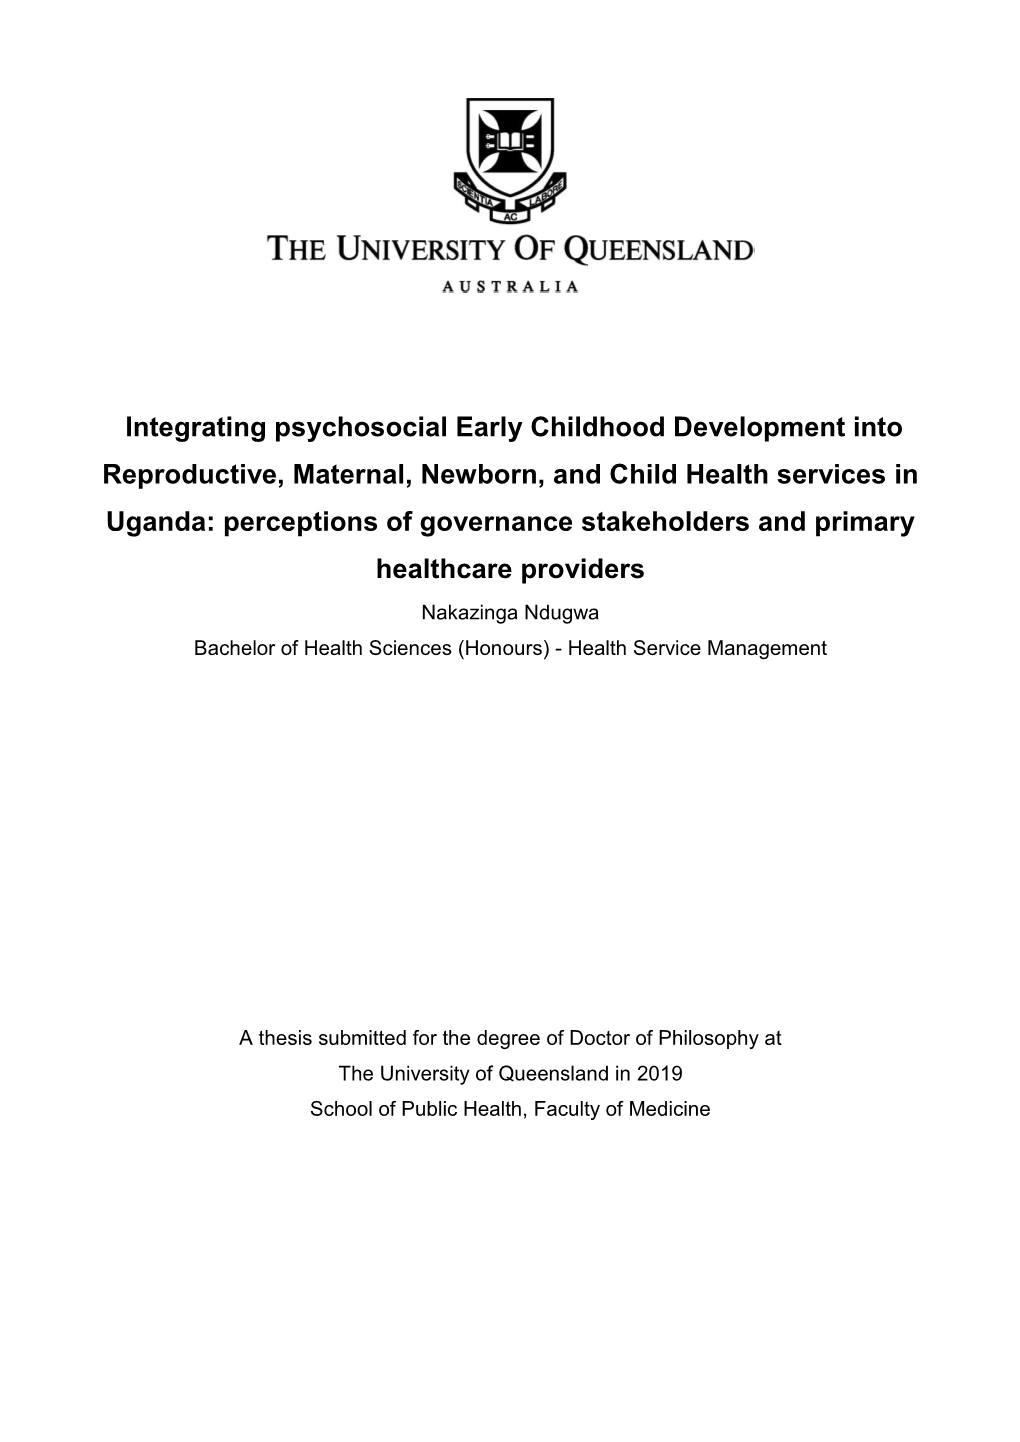 DRAFT THESIS Psychosocial Early Childhood